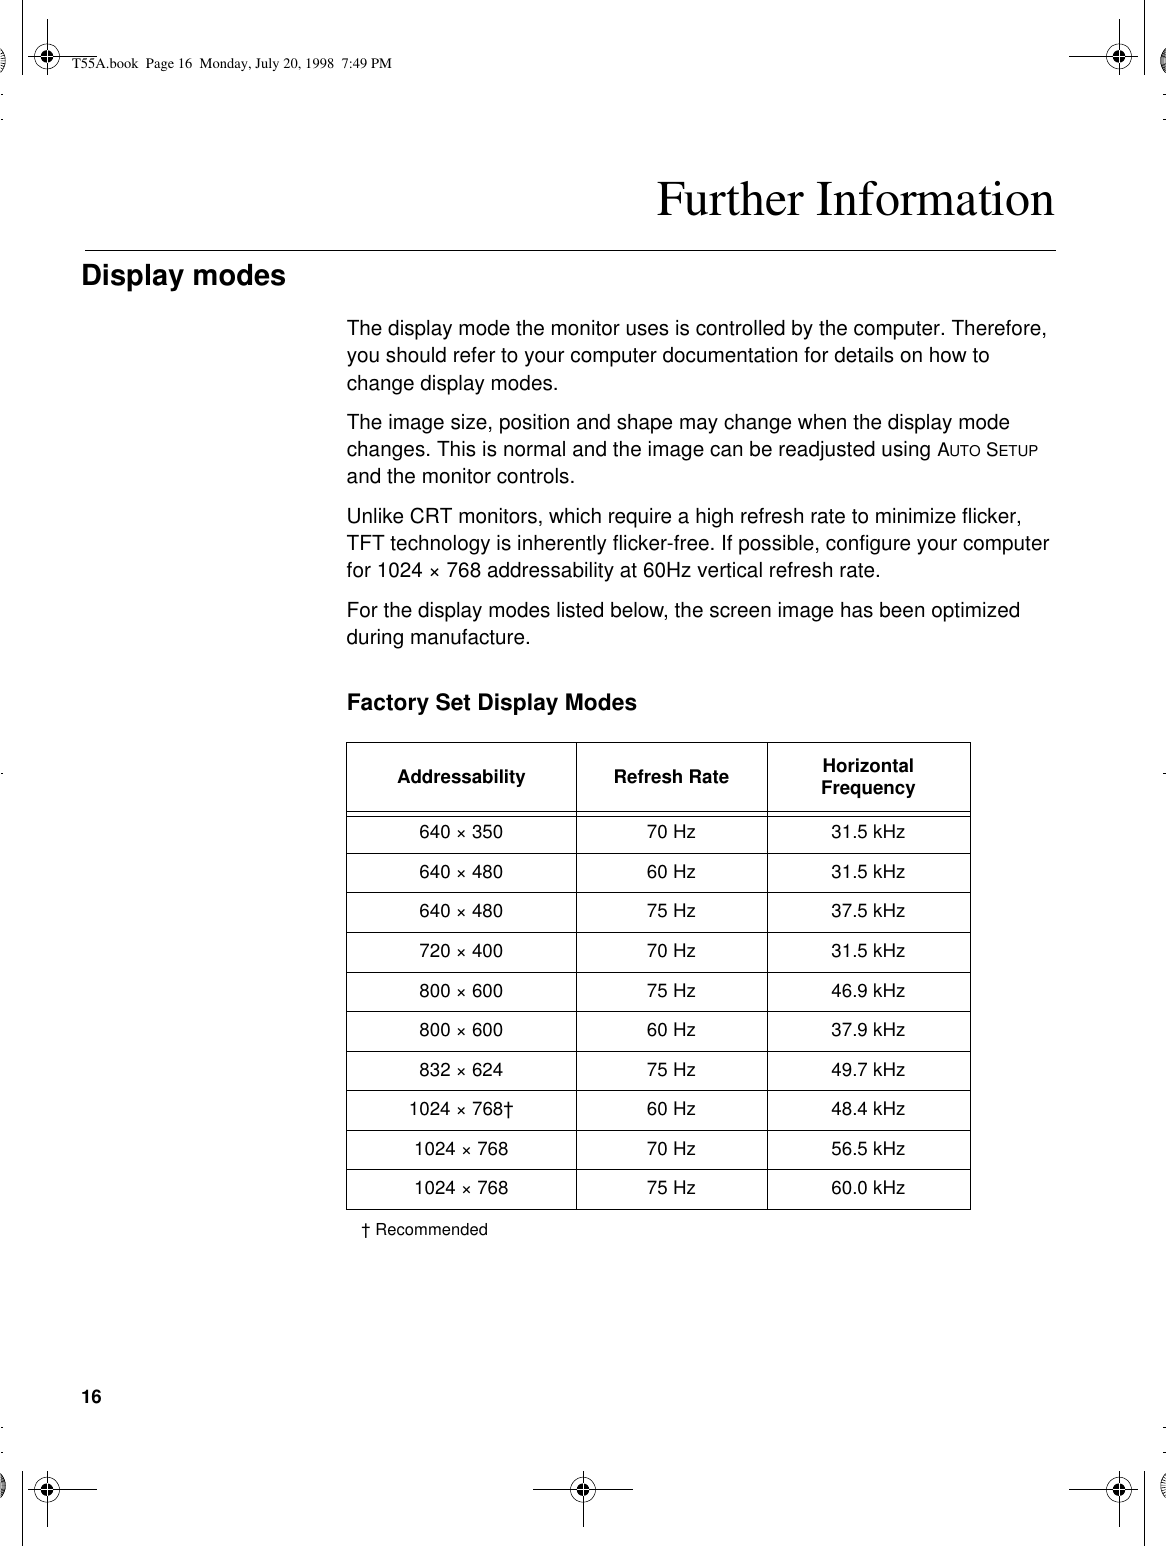 16Further InformationDisplay modesThe display mode the monitor uses is controlled by the computer. Therefore, you should refer to your computer documentation for details on how to change display modes.The image size, position and shape may change when the display mode changes. This is normal and the image can be readjusted using AUTO SETUP and the monitor controls.Unlike CRT monitors, which require a high refresh rate to minimize flicker, TFT technology is inherently flicker-free. If possible, configure your computer for 1024 × 768 addressability at 60Hz vertical refresh rate.For the display modes listed below, the screen image has been optimized during manufacture.Factory Set Display Modes† RecommendedAddressability Refresh Rate Horizontal Frequency640 × 350 70 Hz 31.5 kHz640 × 480 60 Hz 31.5 kHz640 × 480 75 Hz 37.5 kHz720 × 400 70 Hz 31.5 kHz800 × 600 75 Hz 46.9 kHz800 × 600 60 Hz 37.9 kHz832 × 624 75 Hz 49.7 kHz1024 × 768† 60 Hz 48.4 kHz1024 × 768 70 Hz 56.5 kHz1024 × 768 75 Hz 60.0 kHzT55A.book  Page 16  Monday, July 20, 1998  7:49 PM